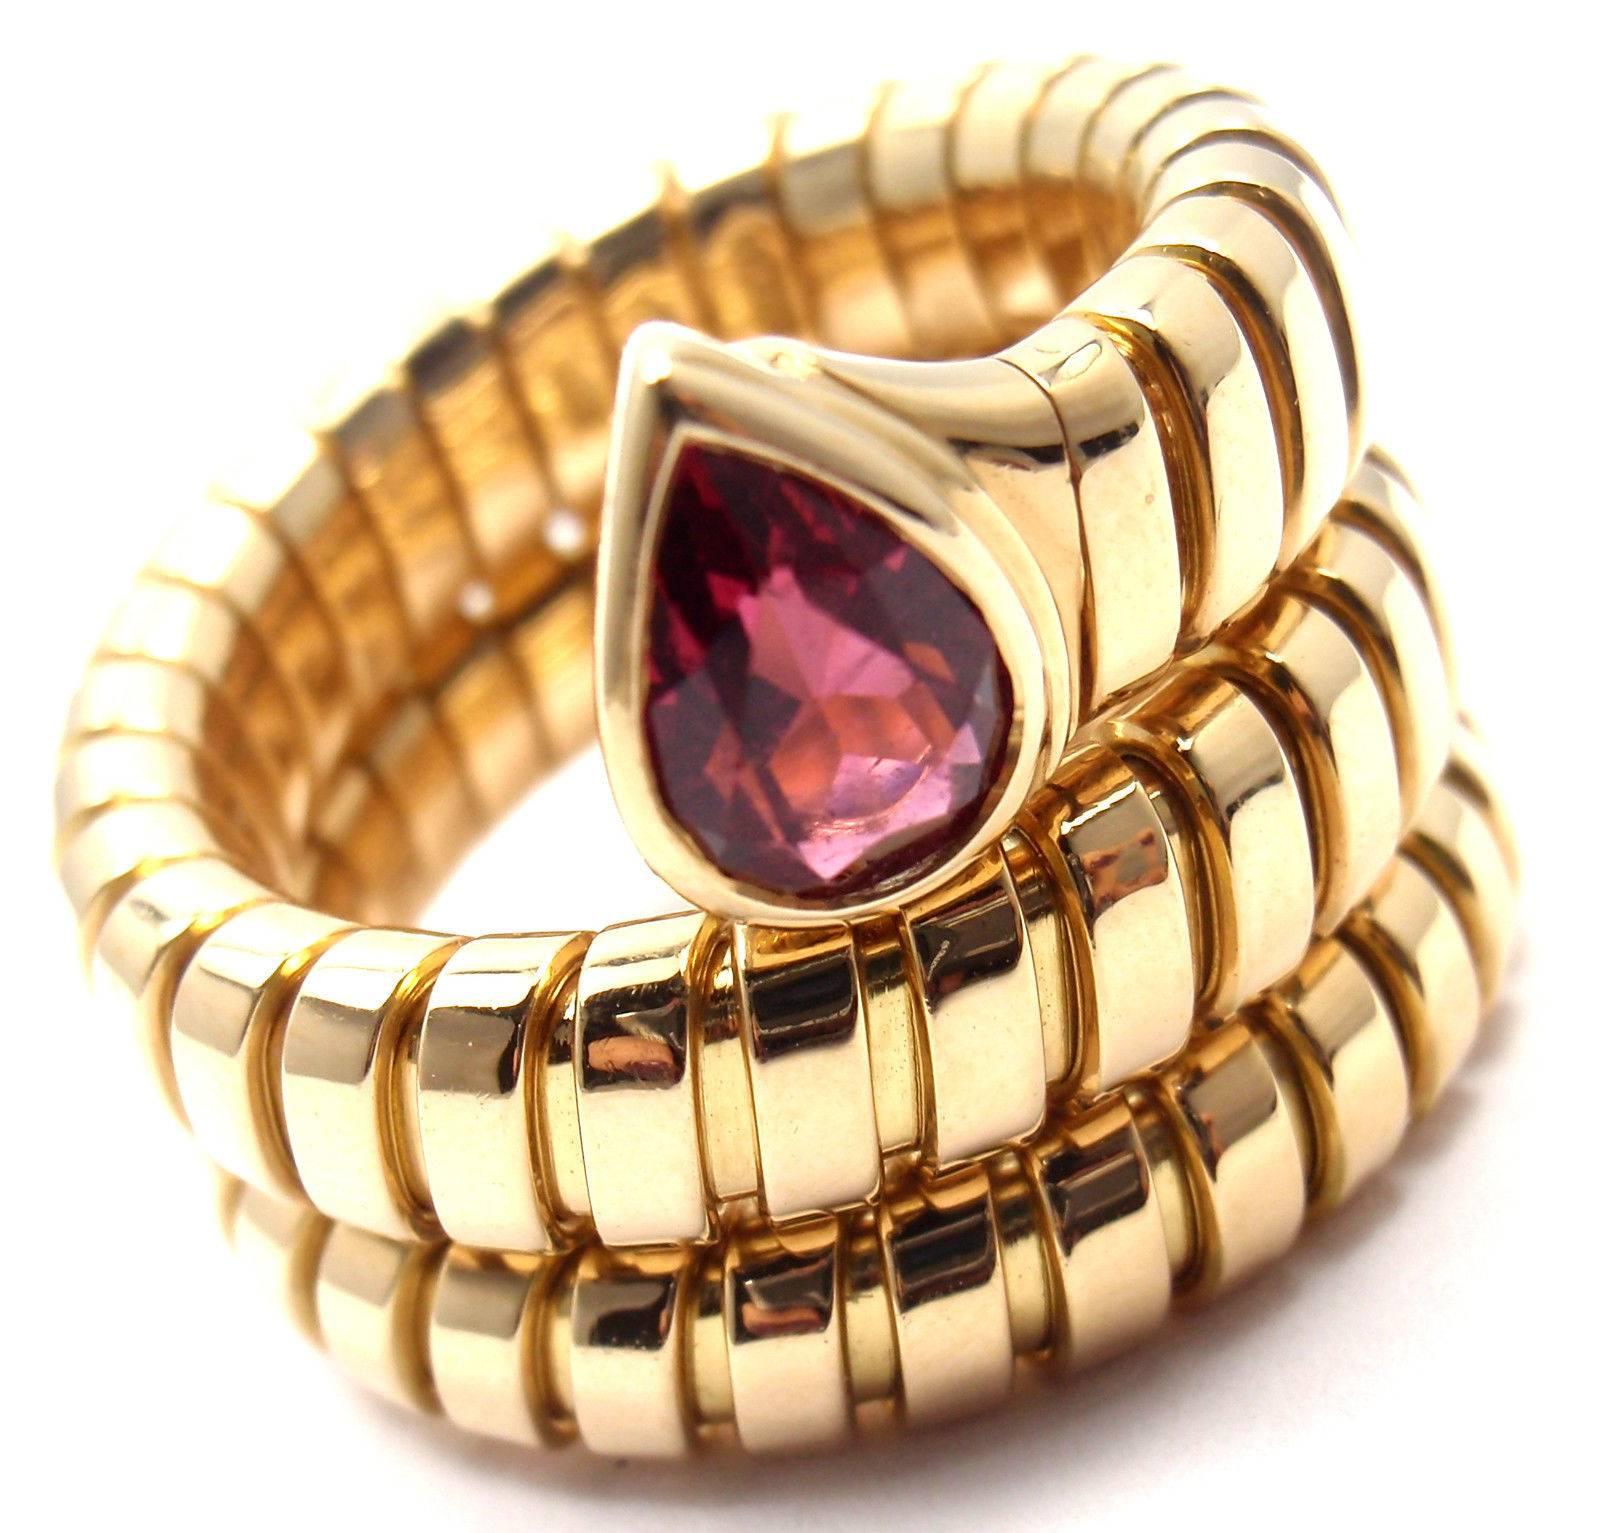 18k Yellow Gold Ruby Coil Snake Ring by Bulgari. 
With One Pear-Shaped Ruby Stone: 6mm x 4mm.

Details:
Ring Size: 5-6 (the ring stretches)
Width: 18mm
Weight: 17.1 grams
Stamped Hallmarks:  Bulgari, 750, 2337AL

*Free Shipping within the